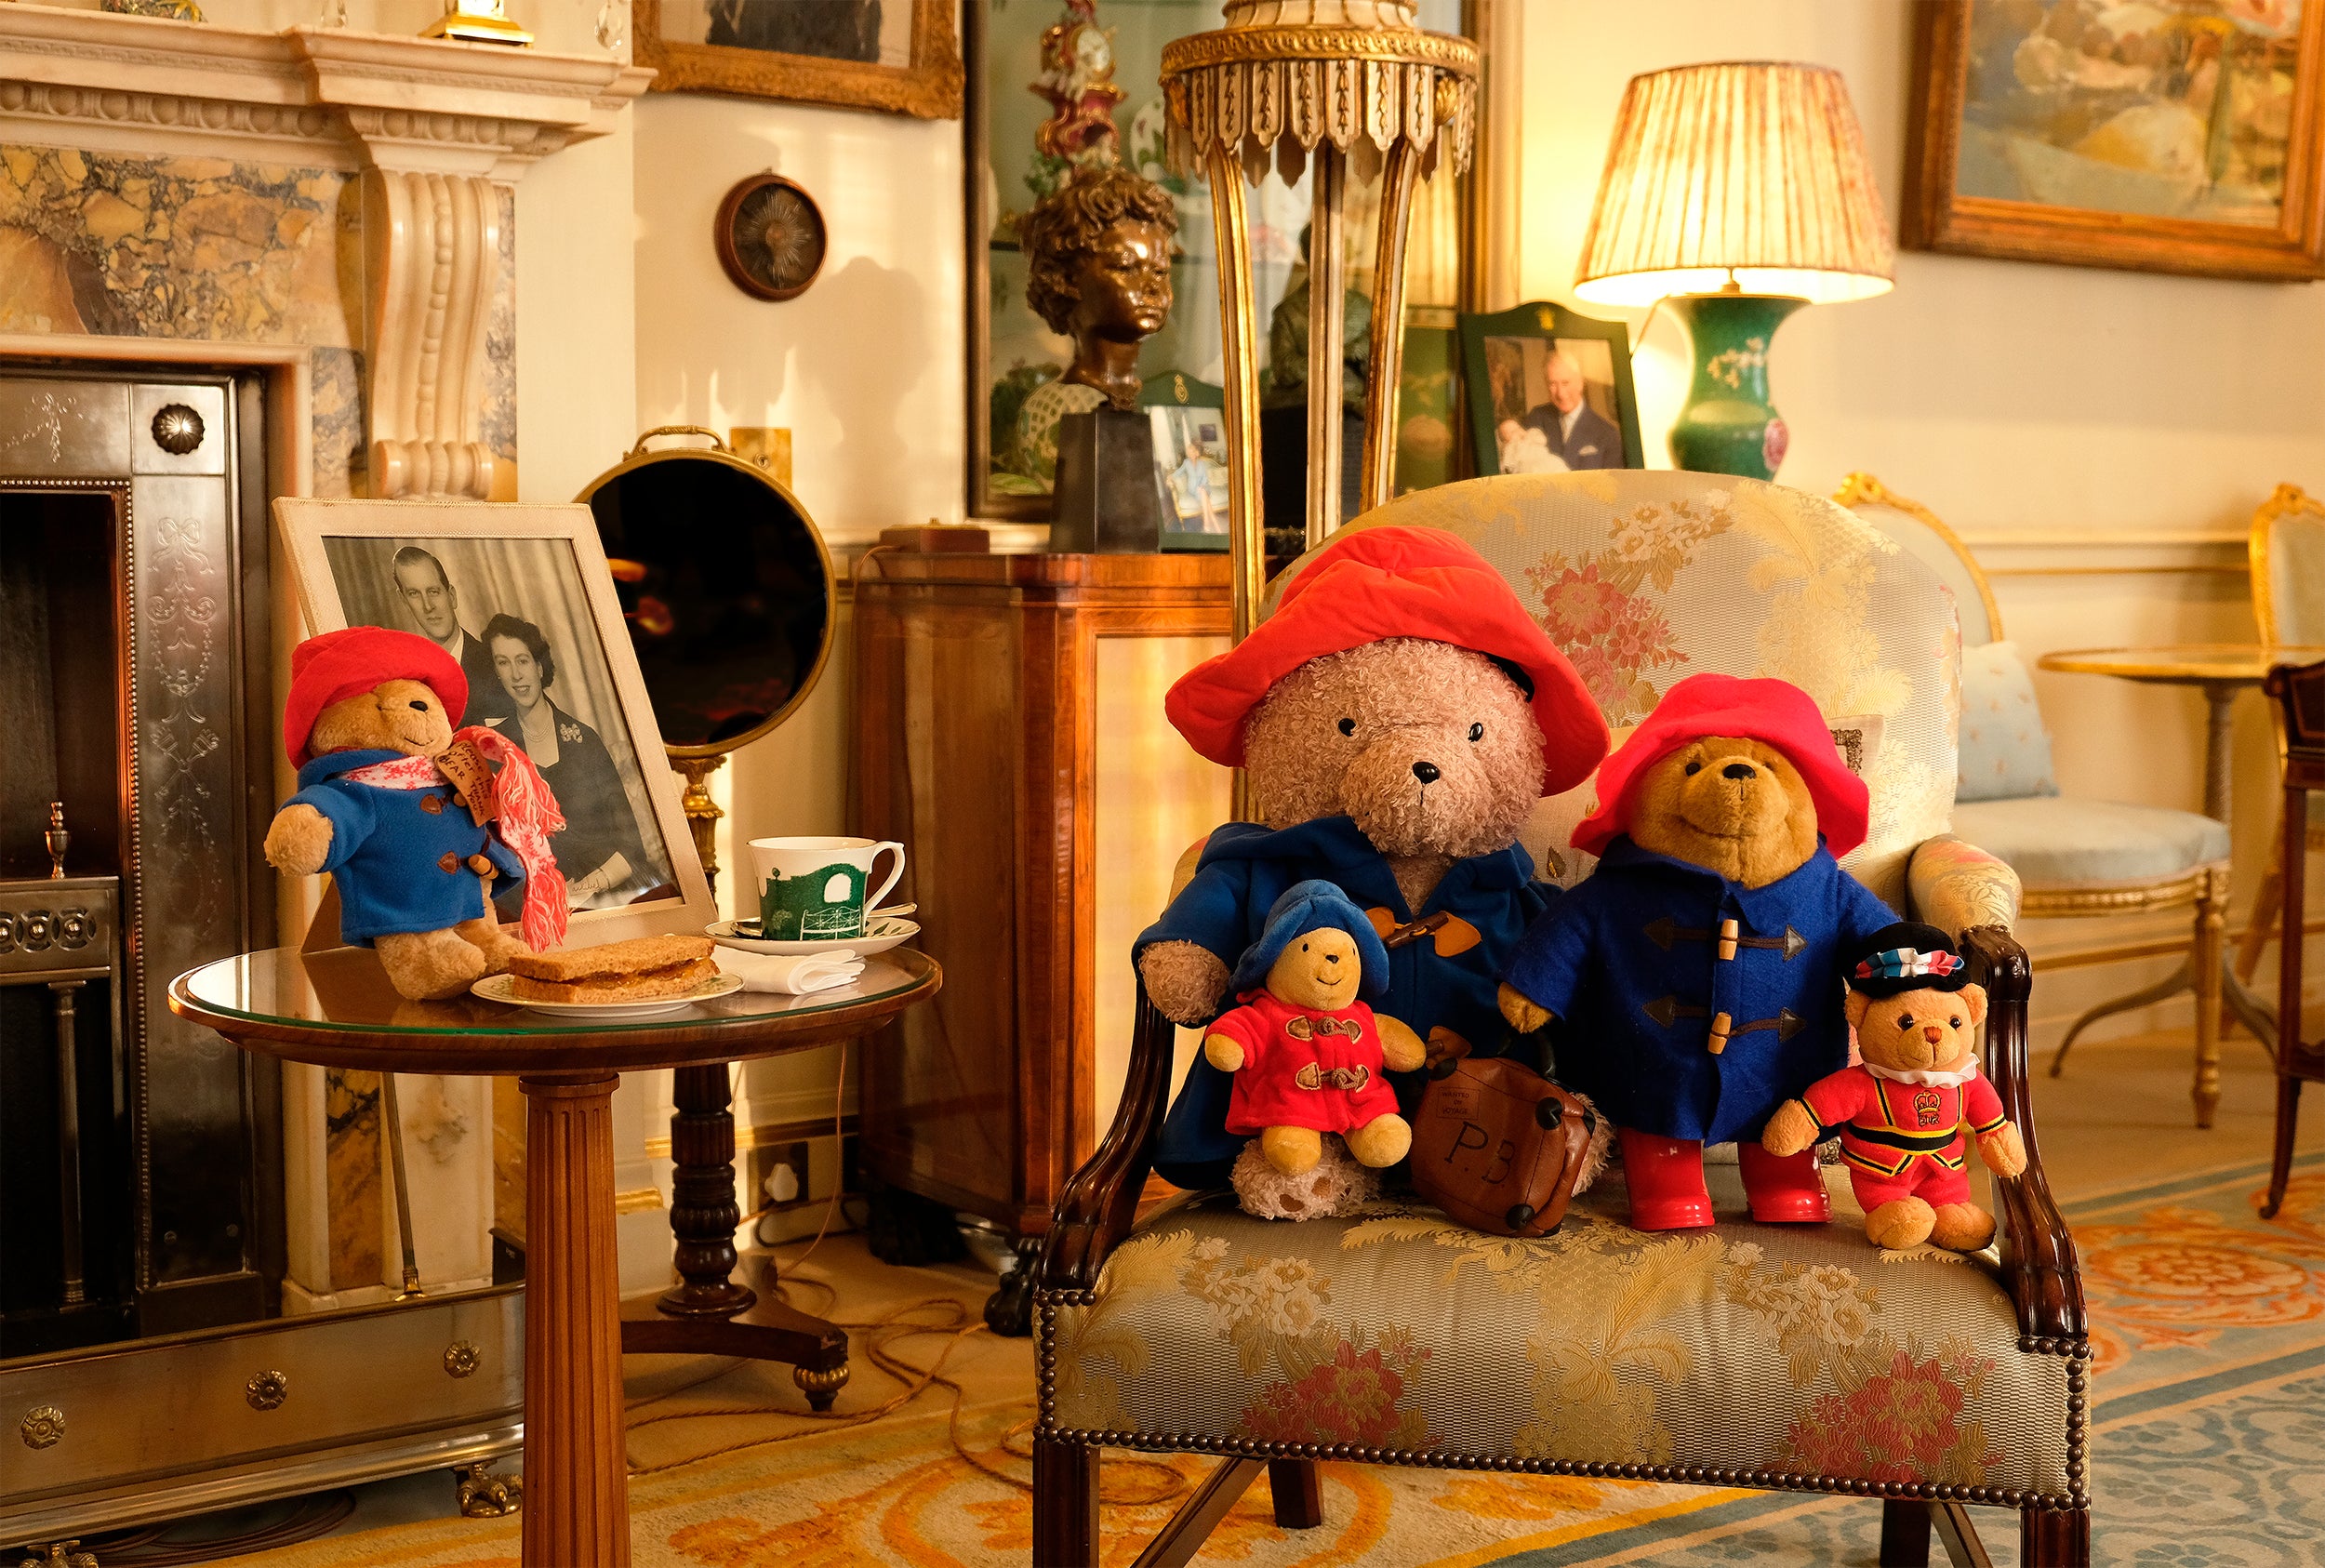 Paddington Bear toys with a cup of tea and a marmalade sandwich in the Morning Room at Clarence House